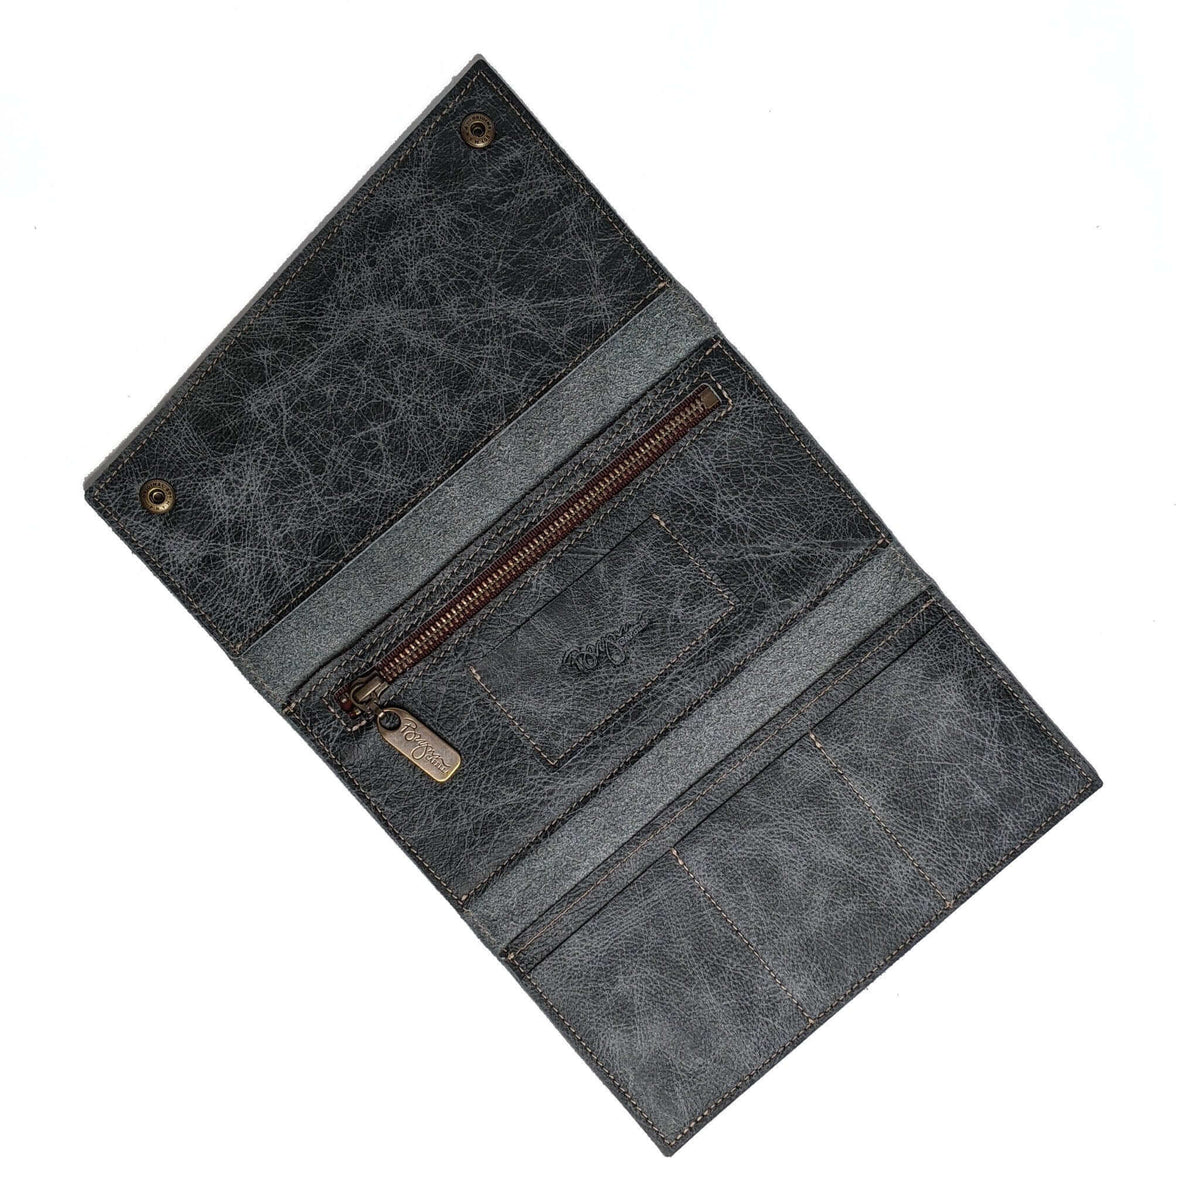 Leather Tri-fold wallet, blue/grey, Brynn Capella, made in USA leather goods